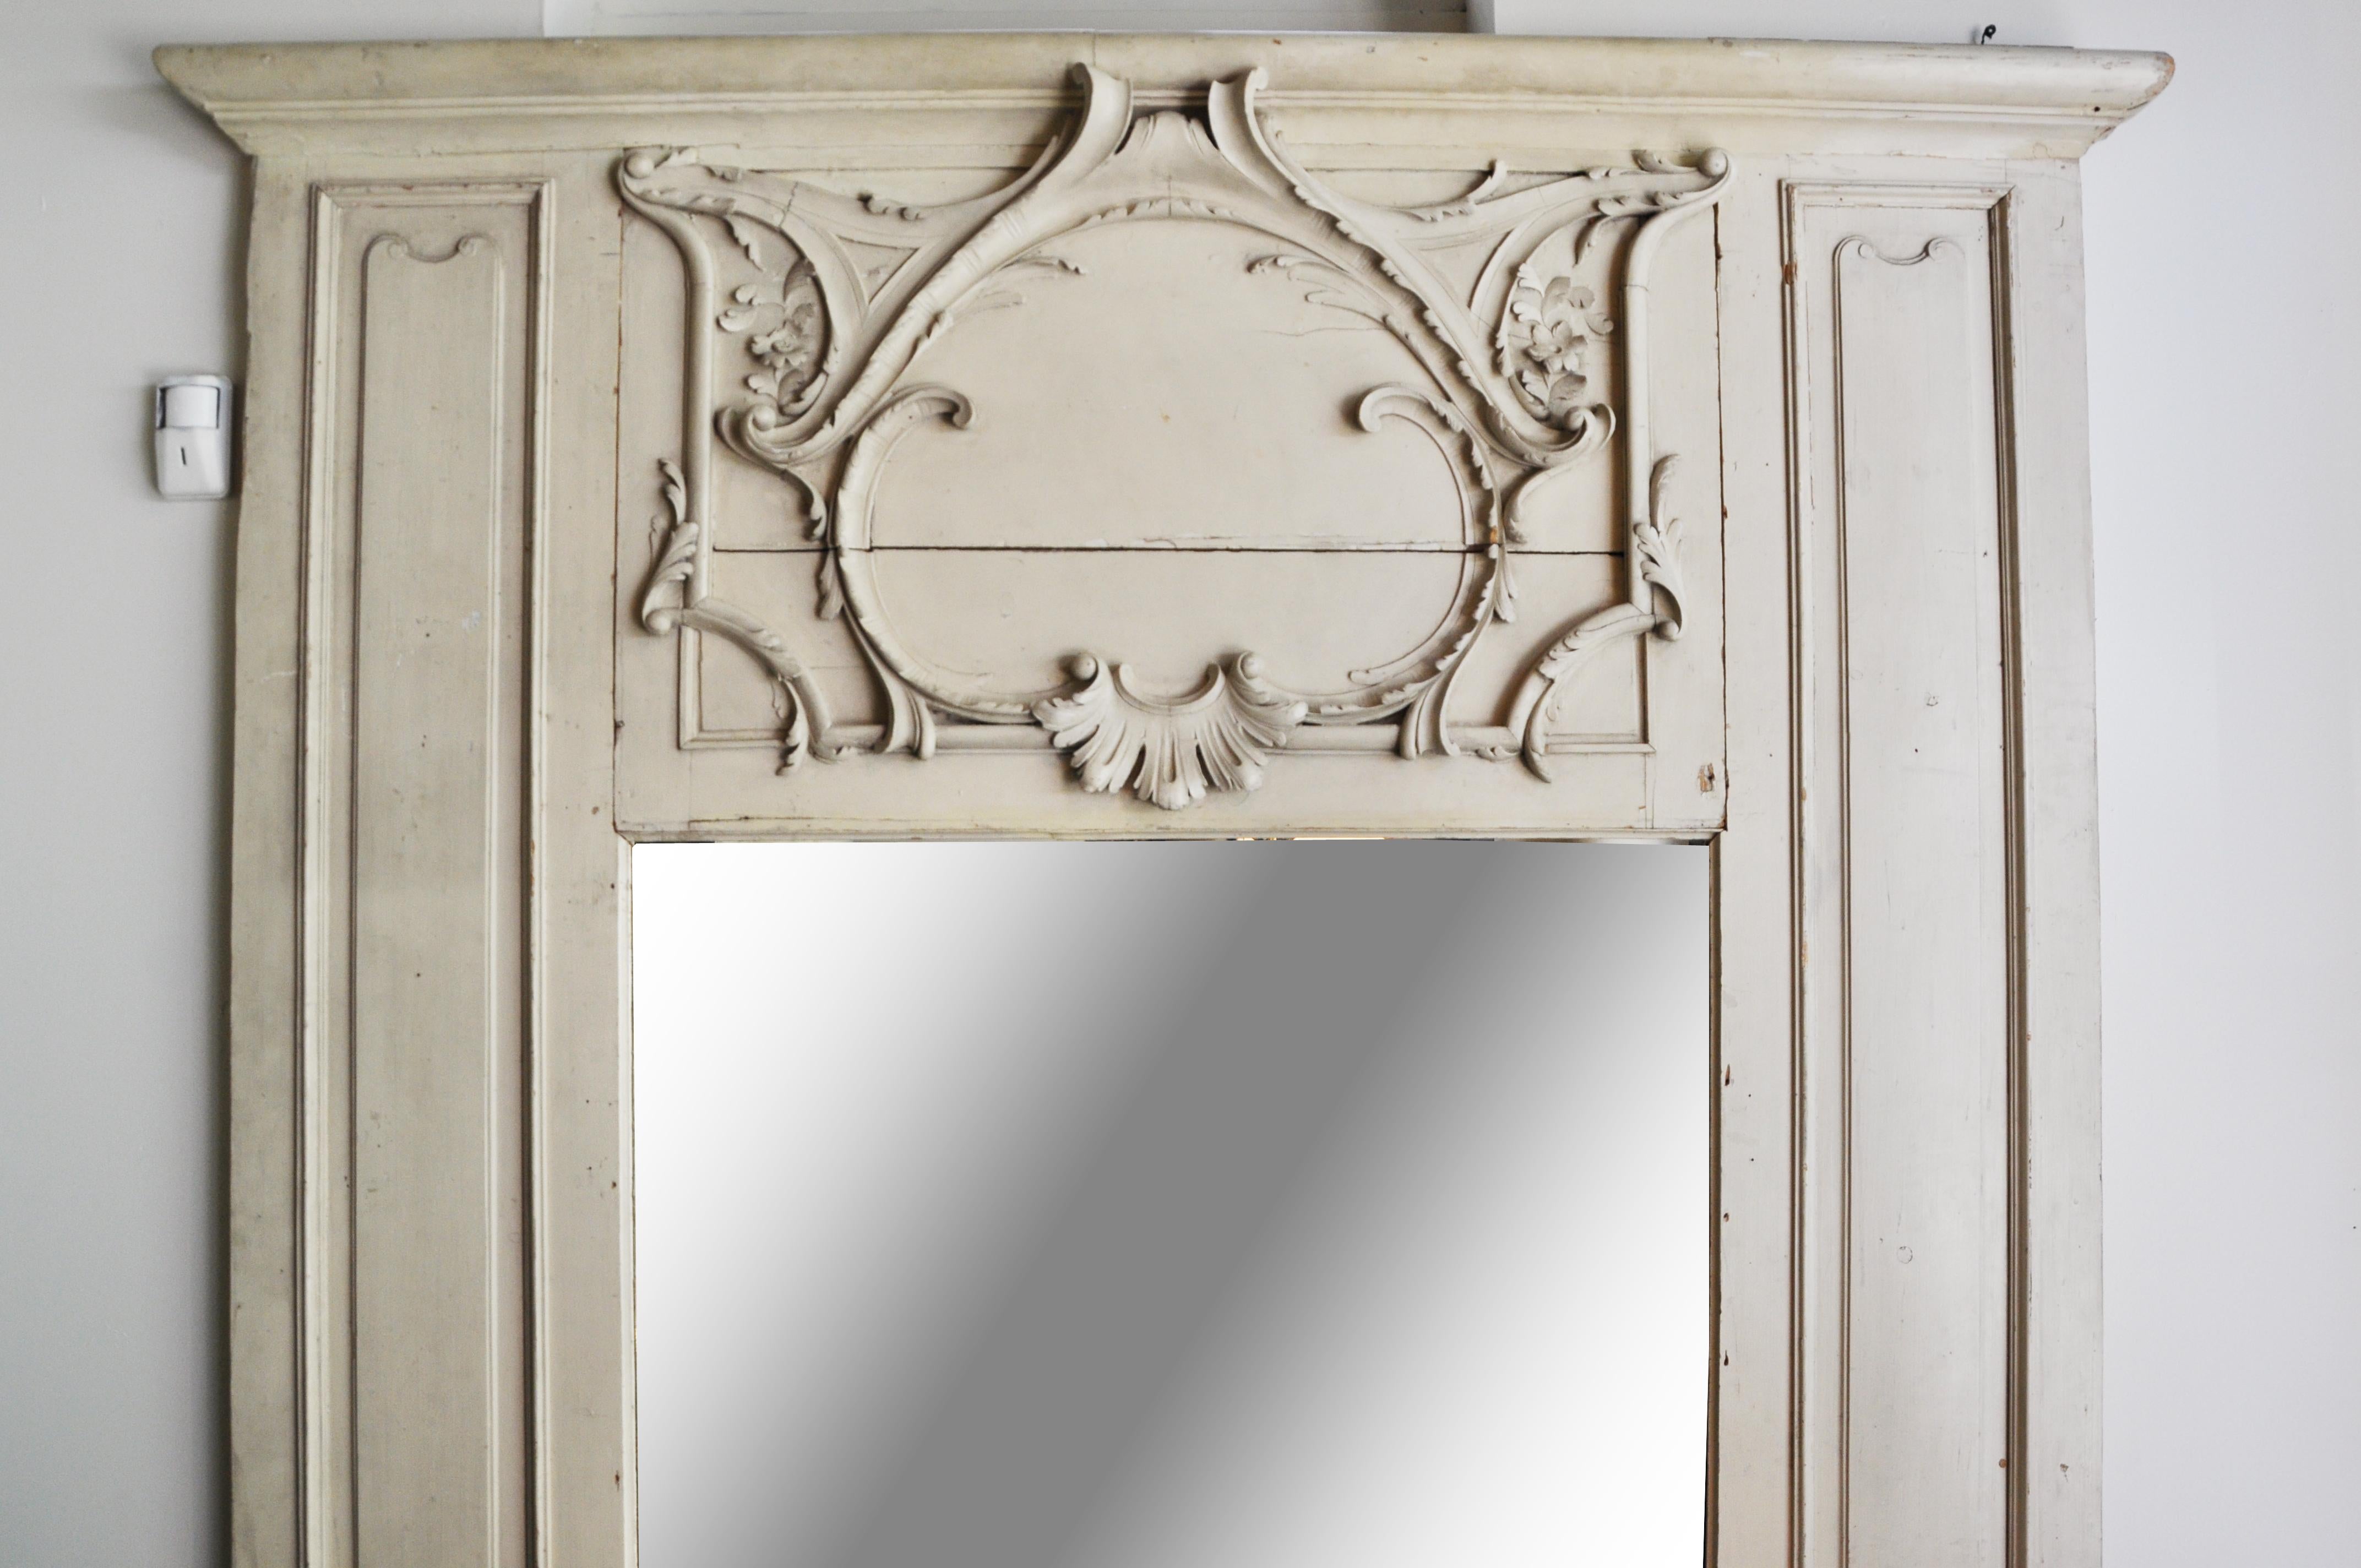 This elegant wall mirror is from France and was made from wood and glass, circa 19th century. This large and well-carved mirror frame was once part of the architecture of a prominent room such as a dining room or salon. The flat panels are fir or